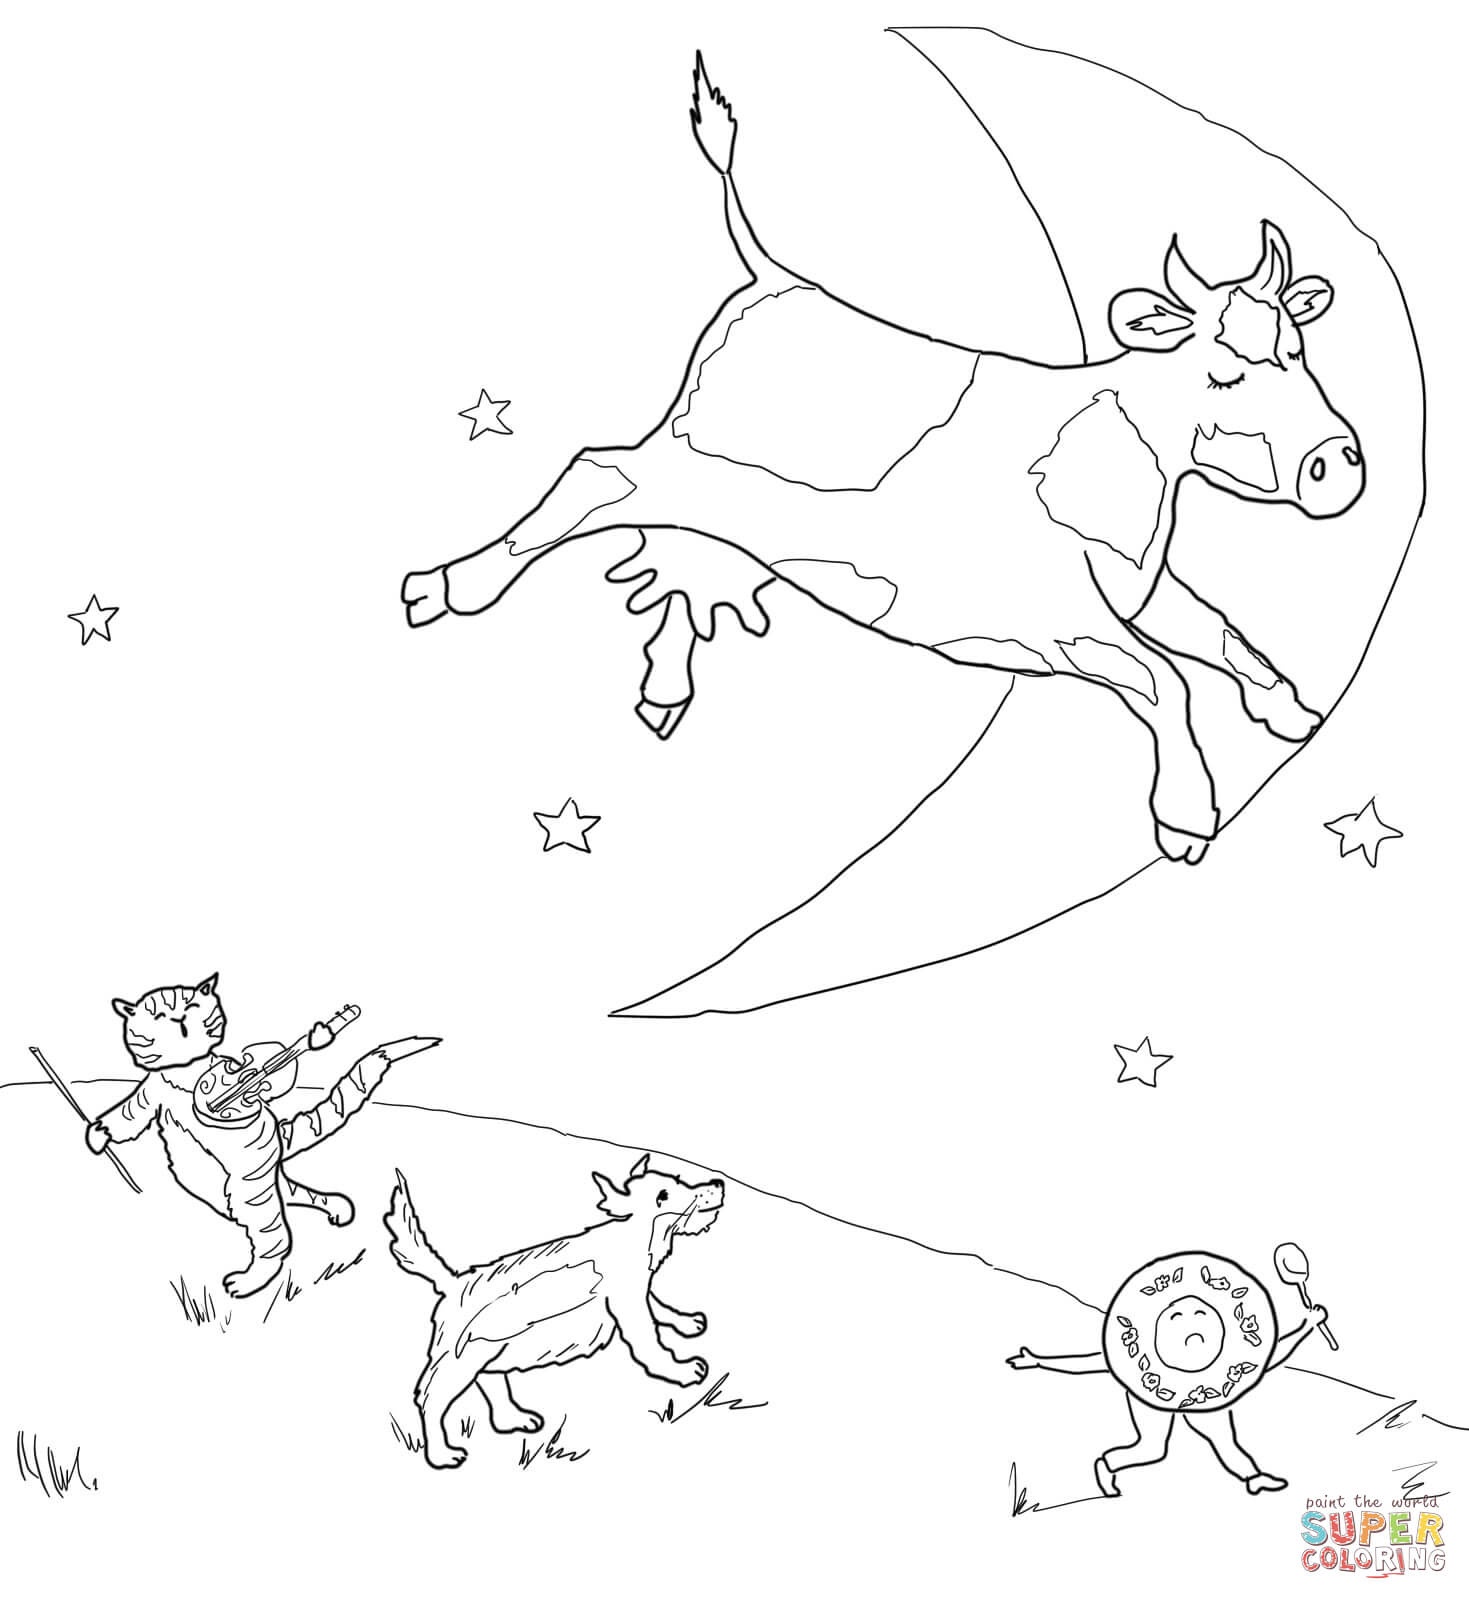 Mother Goose Nursery Rhymes Coloring Pages | Free Coloring Pages - Free Printable Nursery Rhyme Coloring Pages